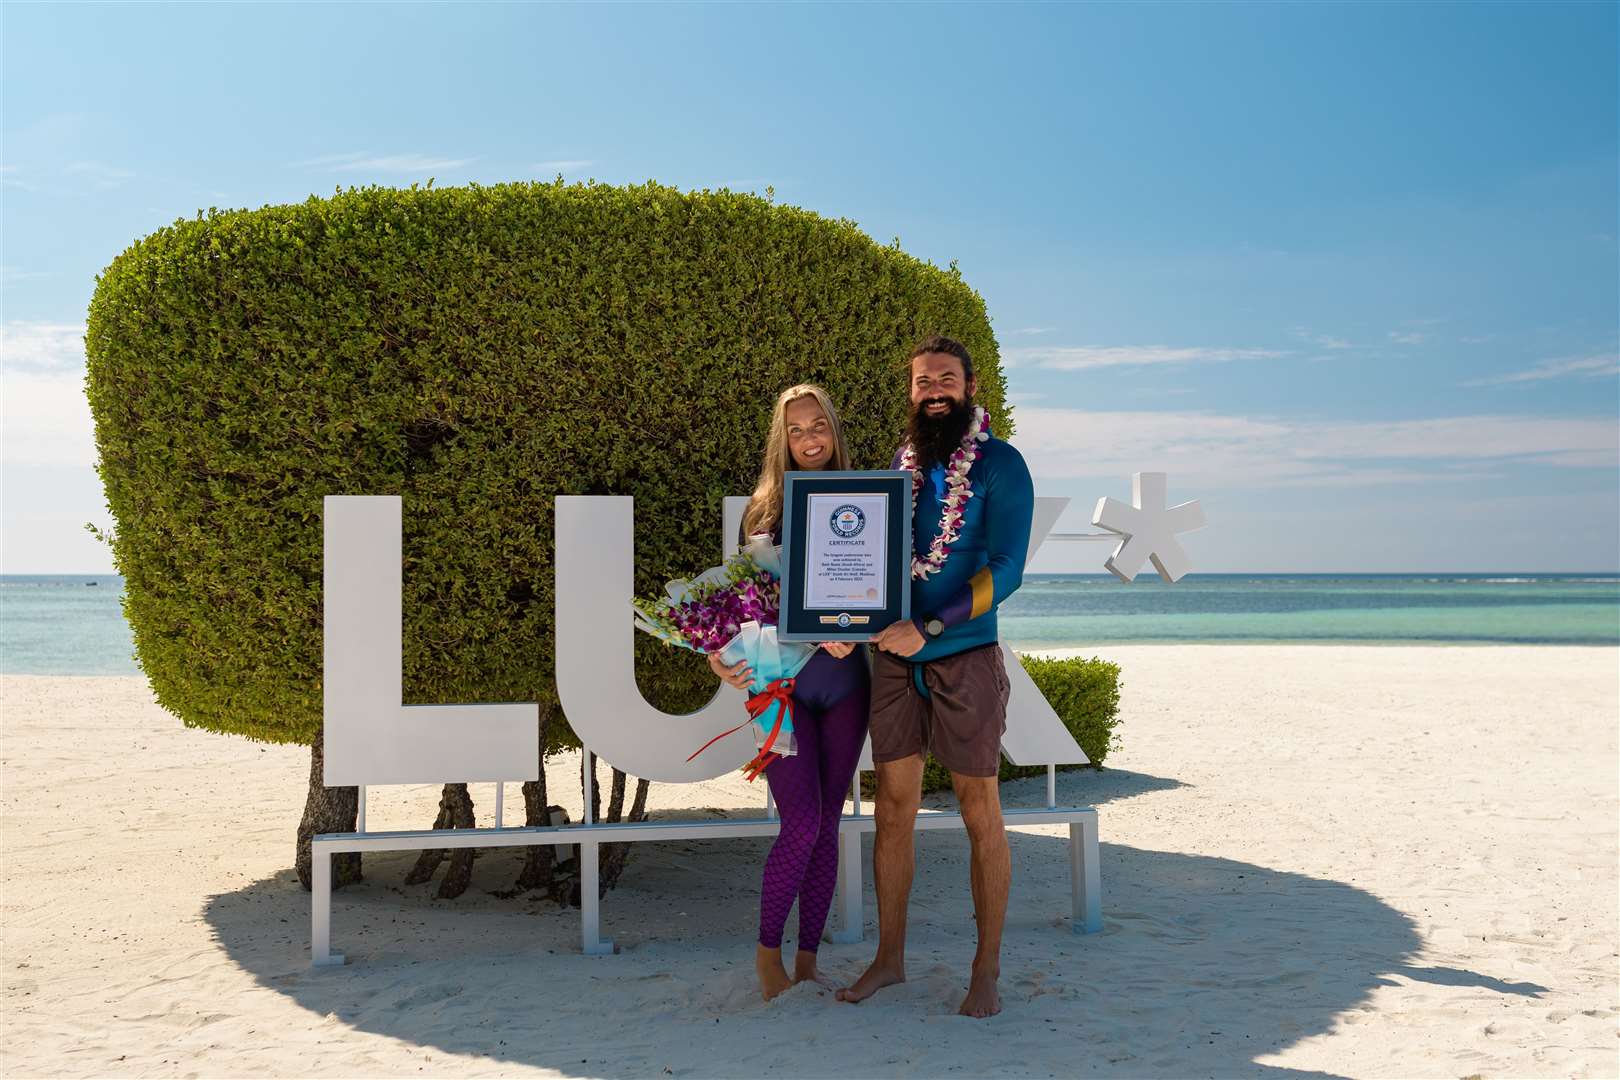 Beth Neale and Miles Cloutier with their Guinness World Record certificate (Photo Fanatics/Guinness World Records)